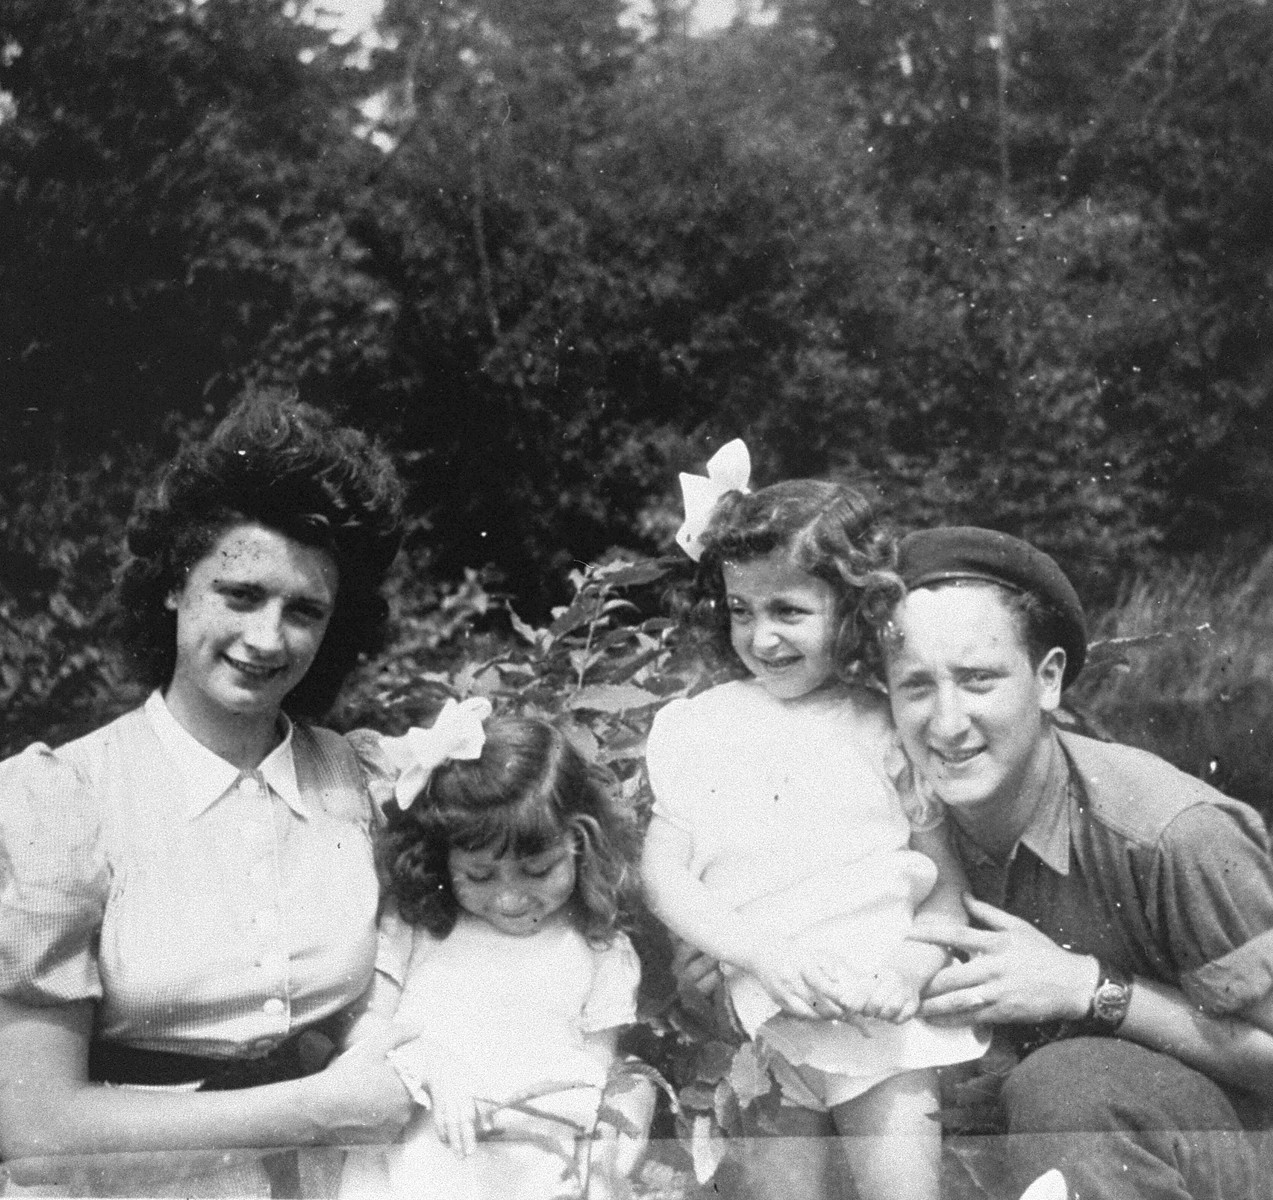 Annette and Margo Lederman, two Jewish children in hiding, pose with the daughter of their rescuers, Lydia van Buggenhout, and an allied soldier in Rumst, Belgium.